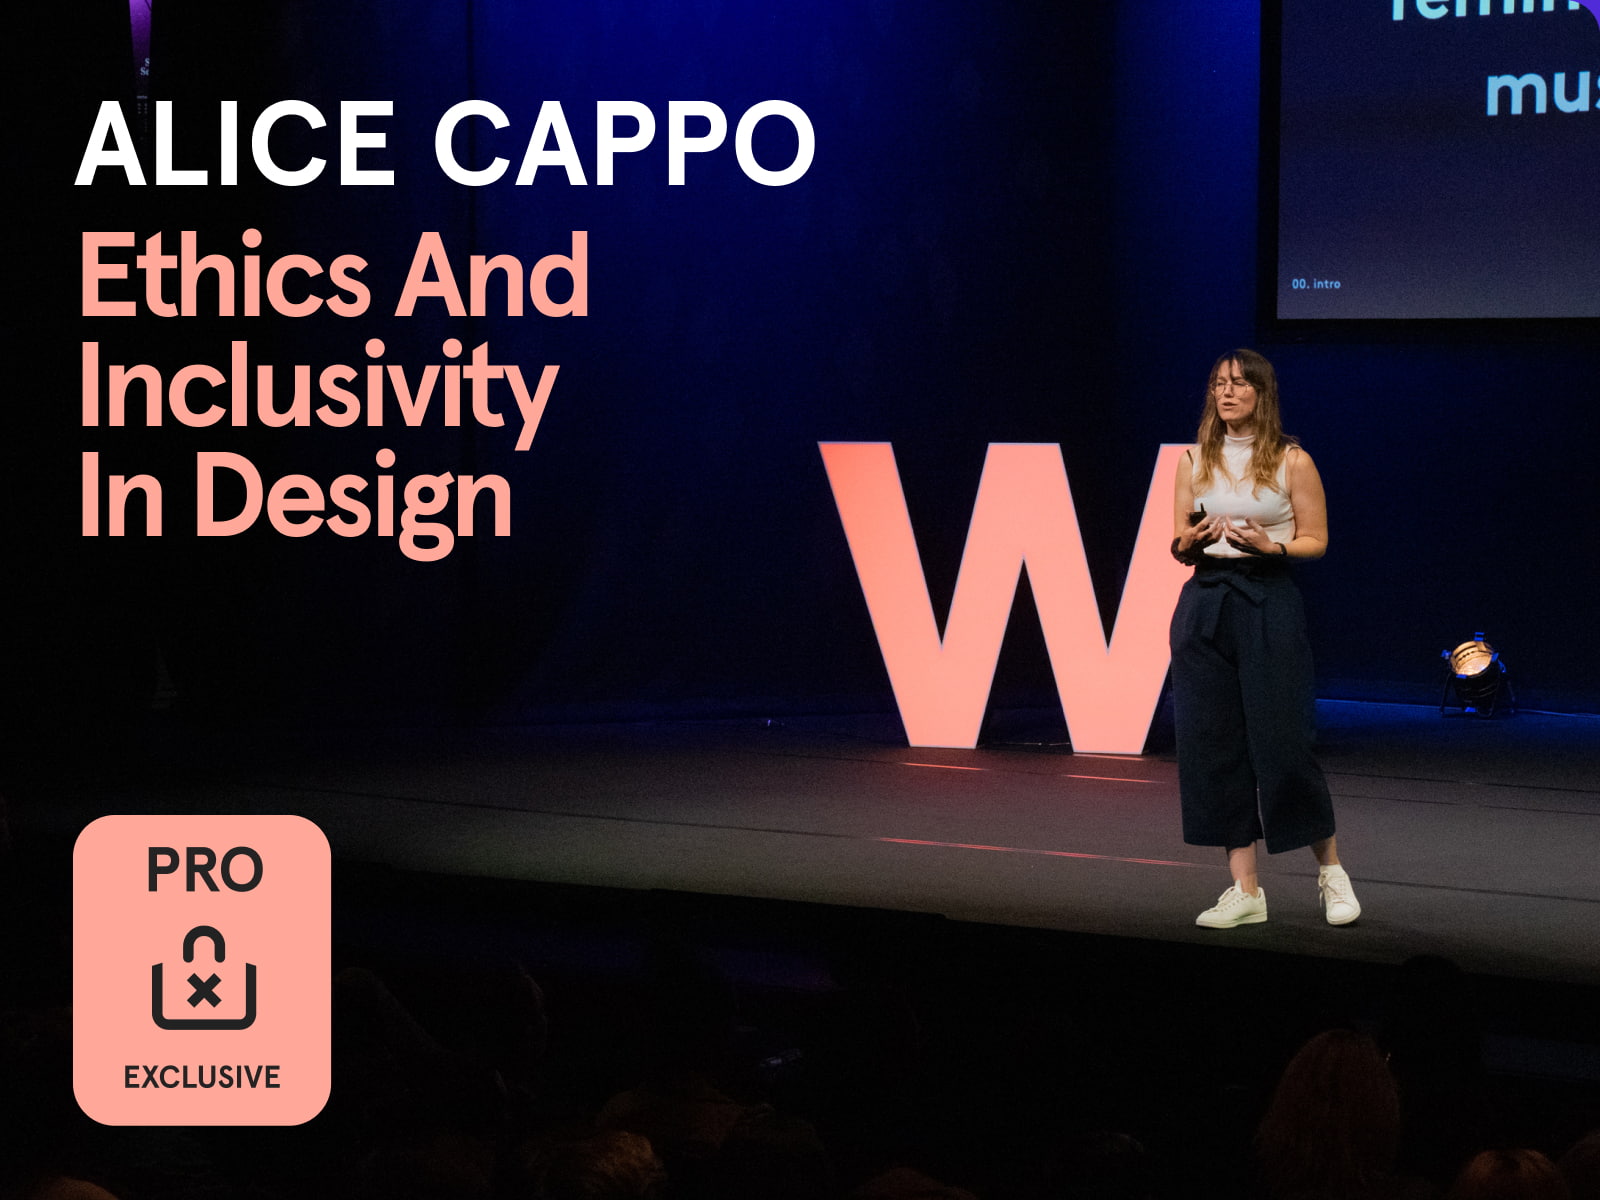 New PRO Content available: watch Alice Cappo's new talk from Awwwards Conference Amsterdam